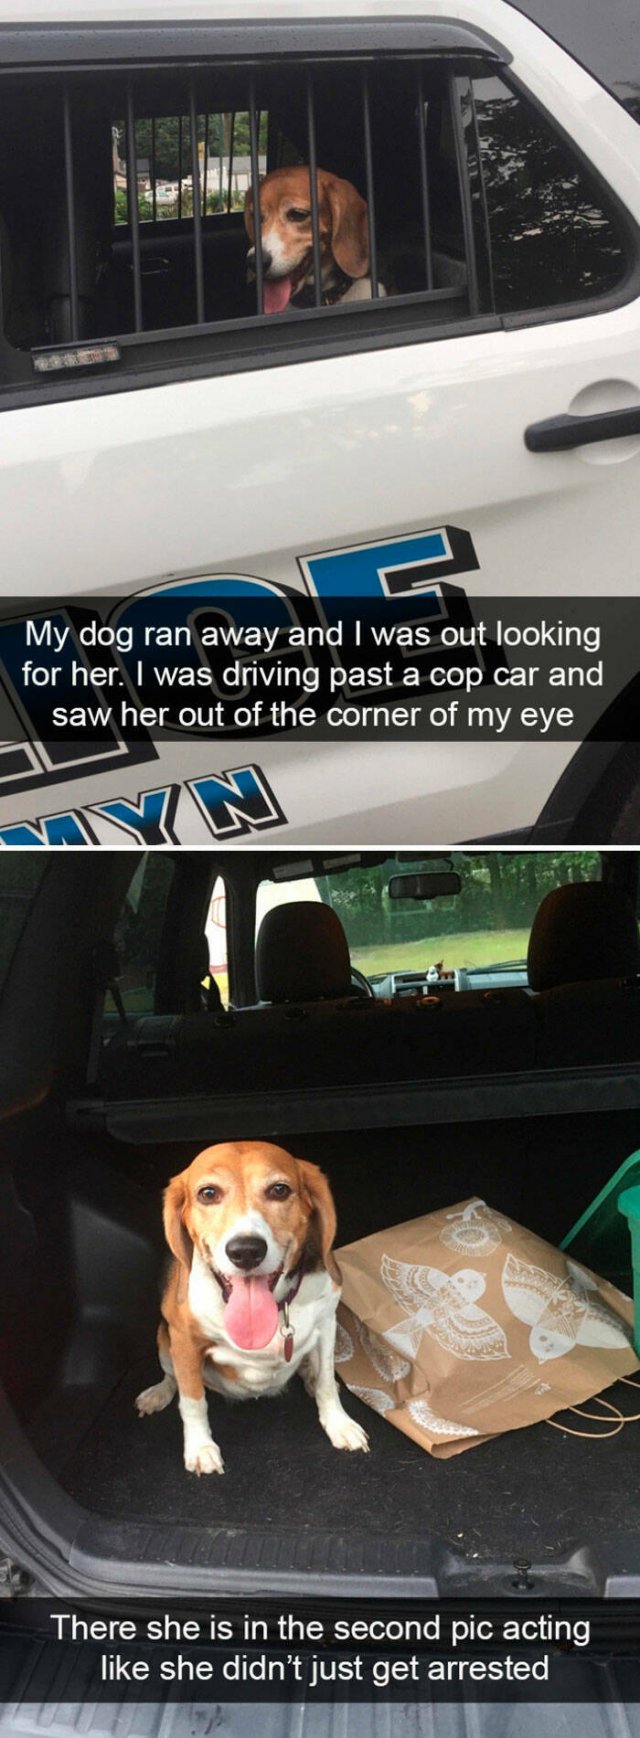 Memes With Dogs, part 4